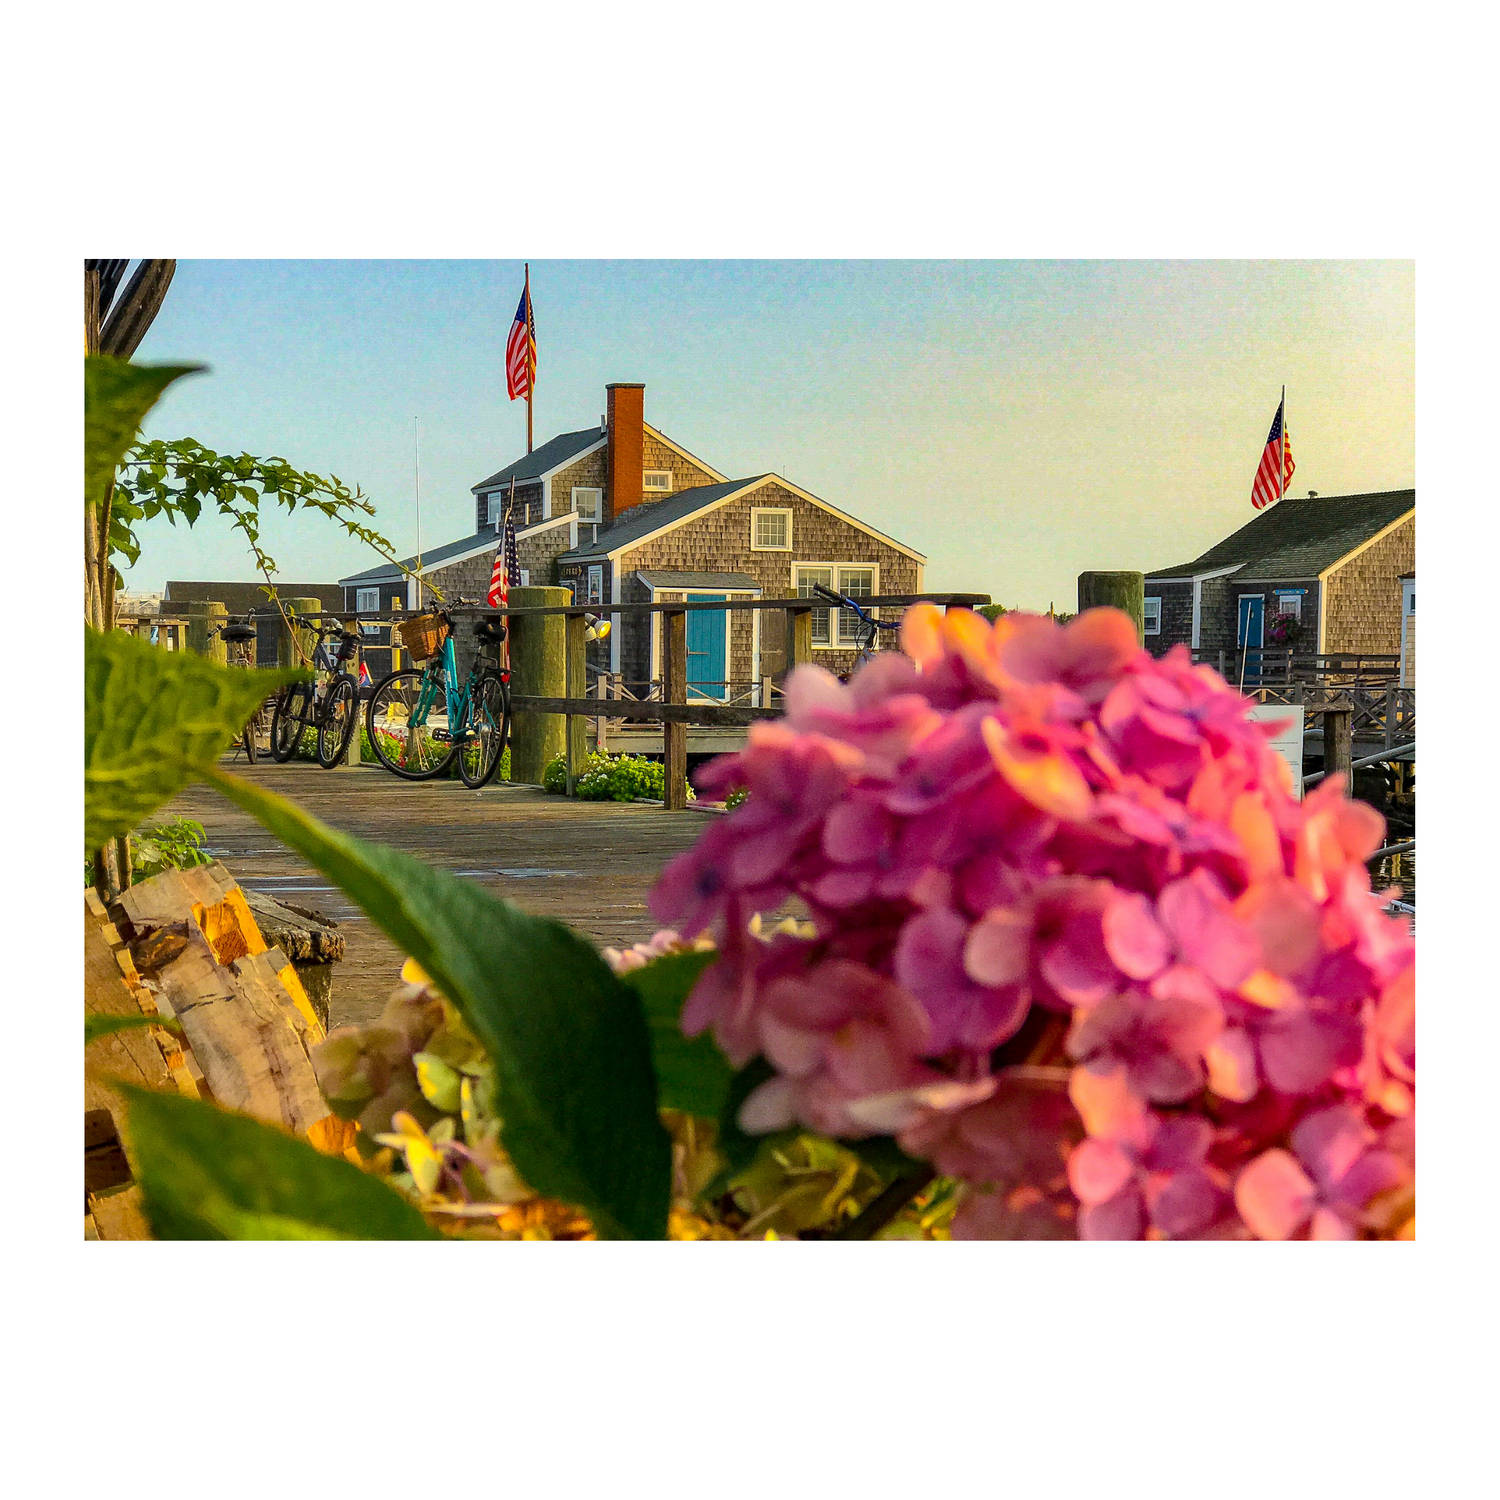 The Cottages and Floral – Landscape / 8×10 (Print Only)